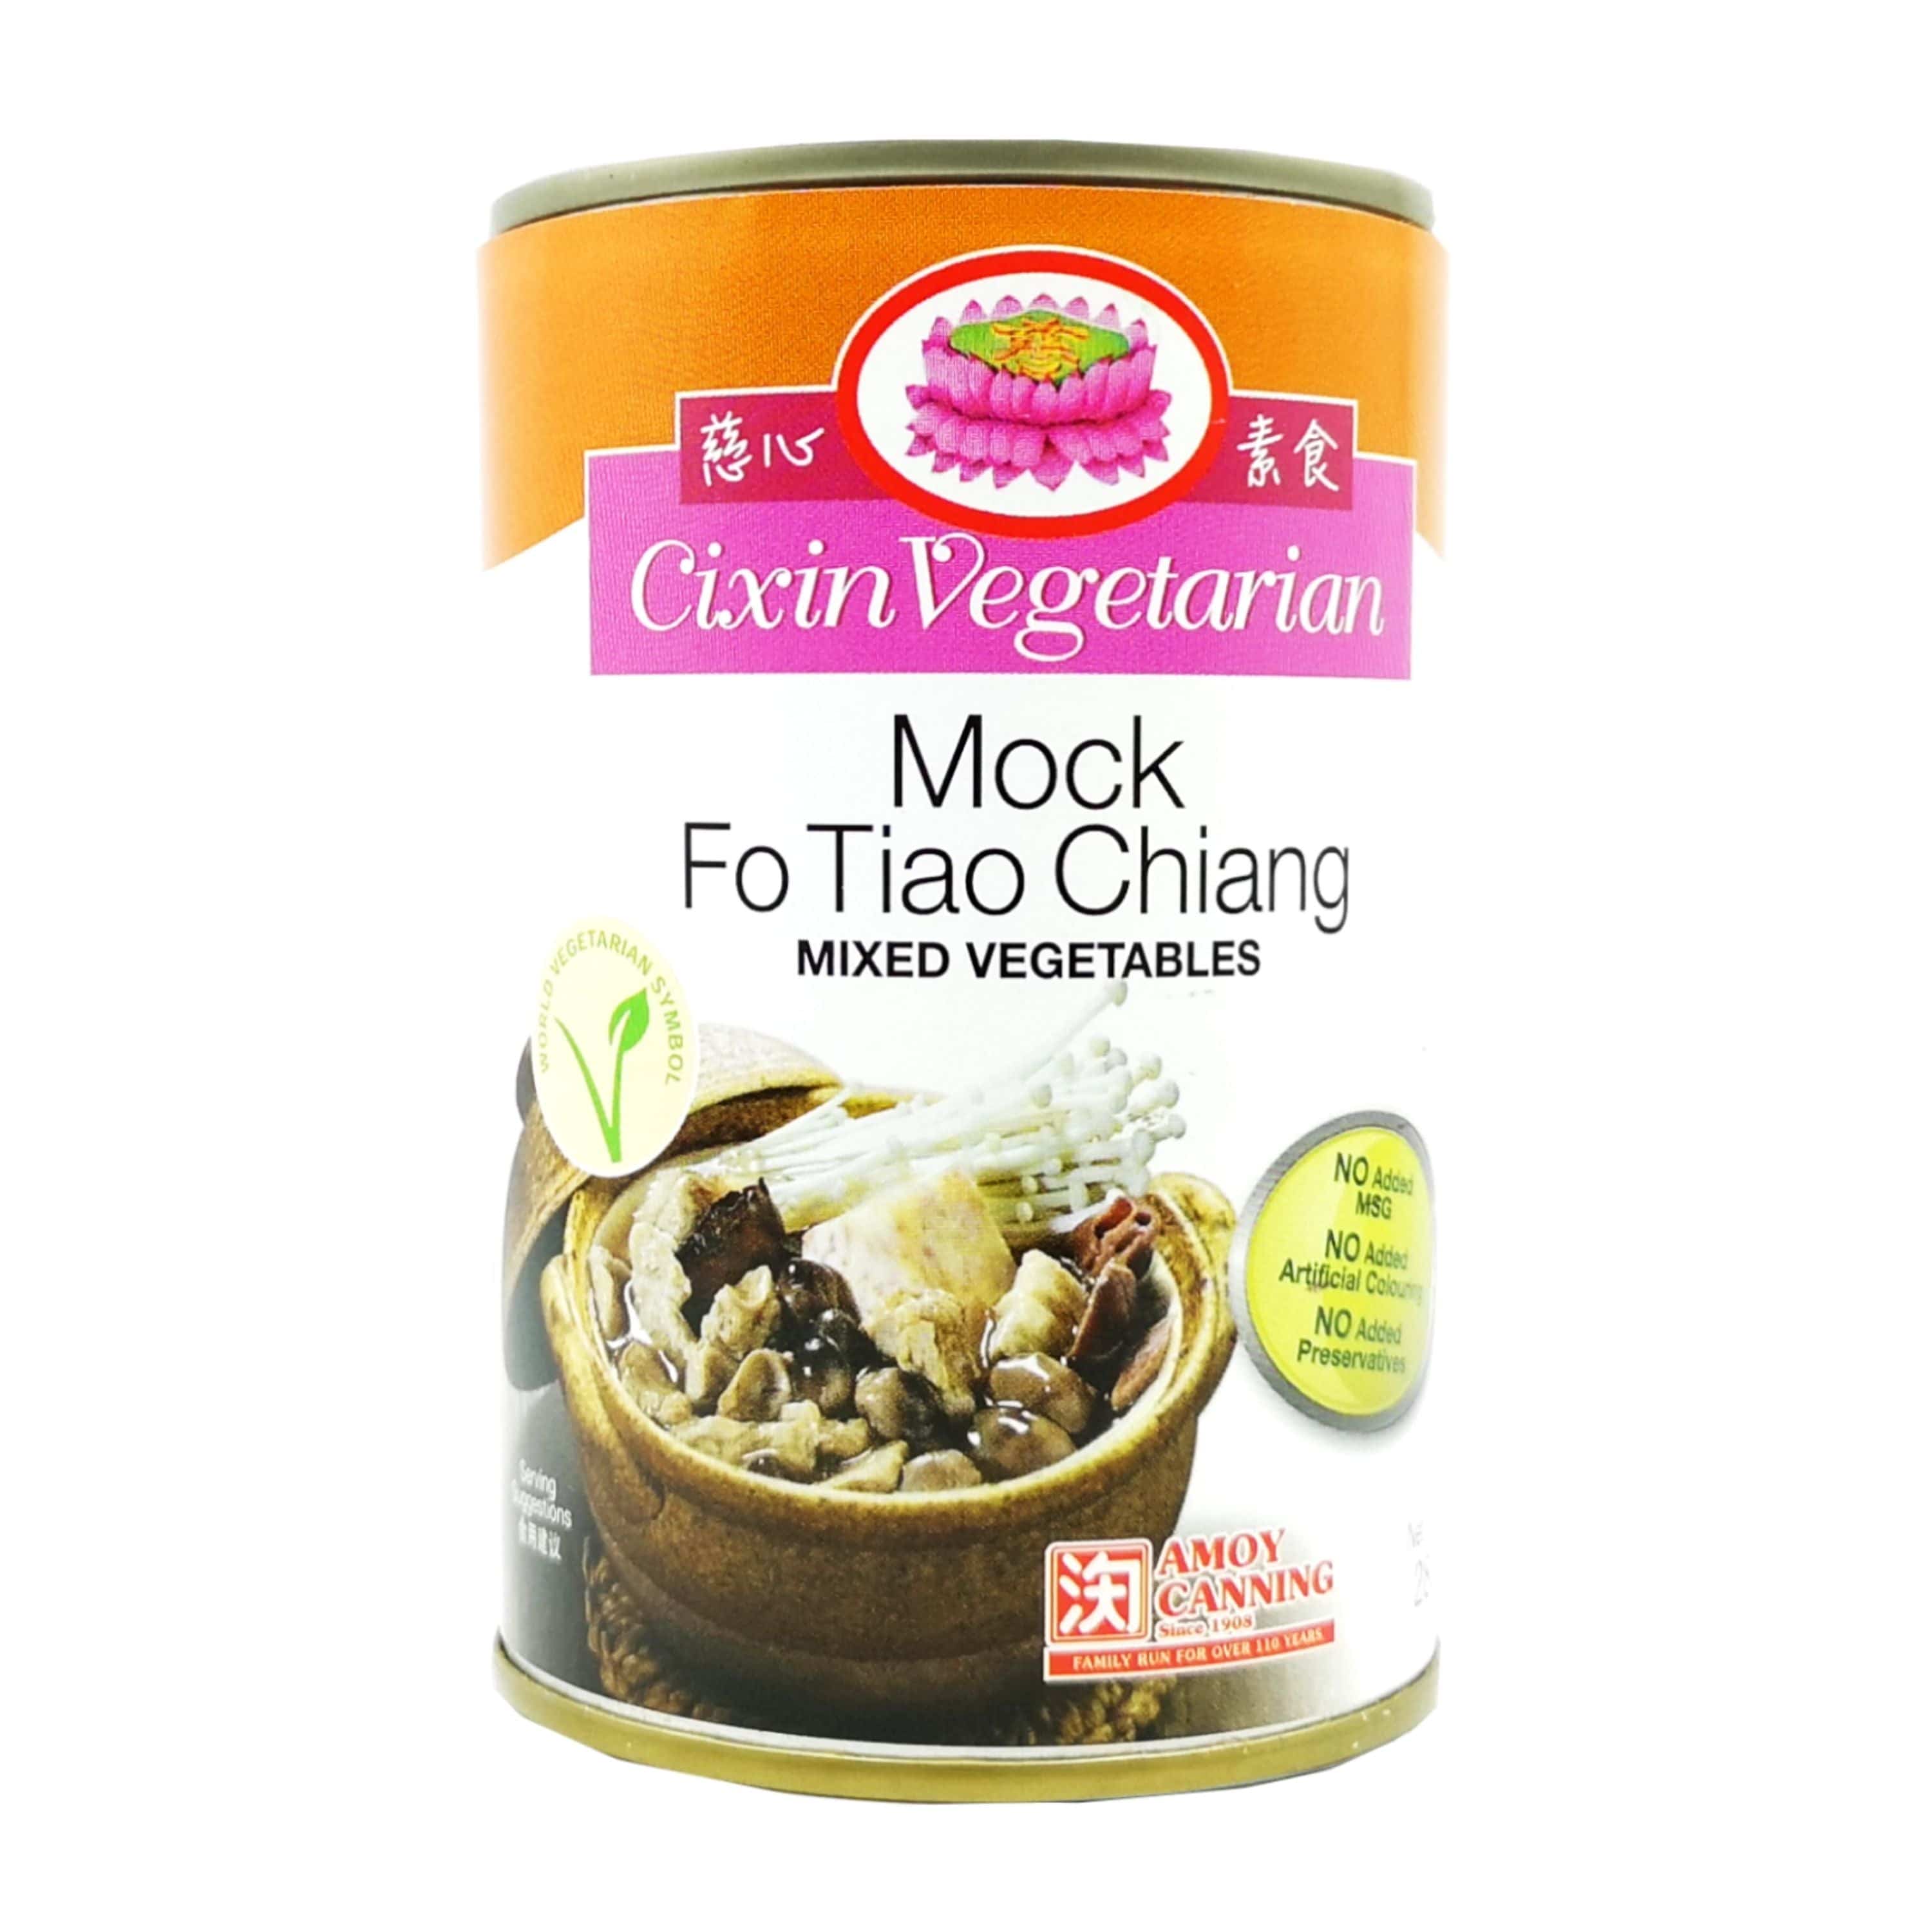 Dry Goods CIXIN Vegetarian Fo Tiao Chiang (Mixed Vegetables) 285g